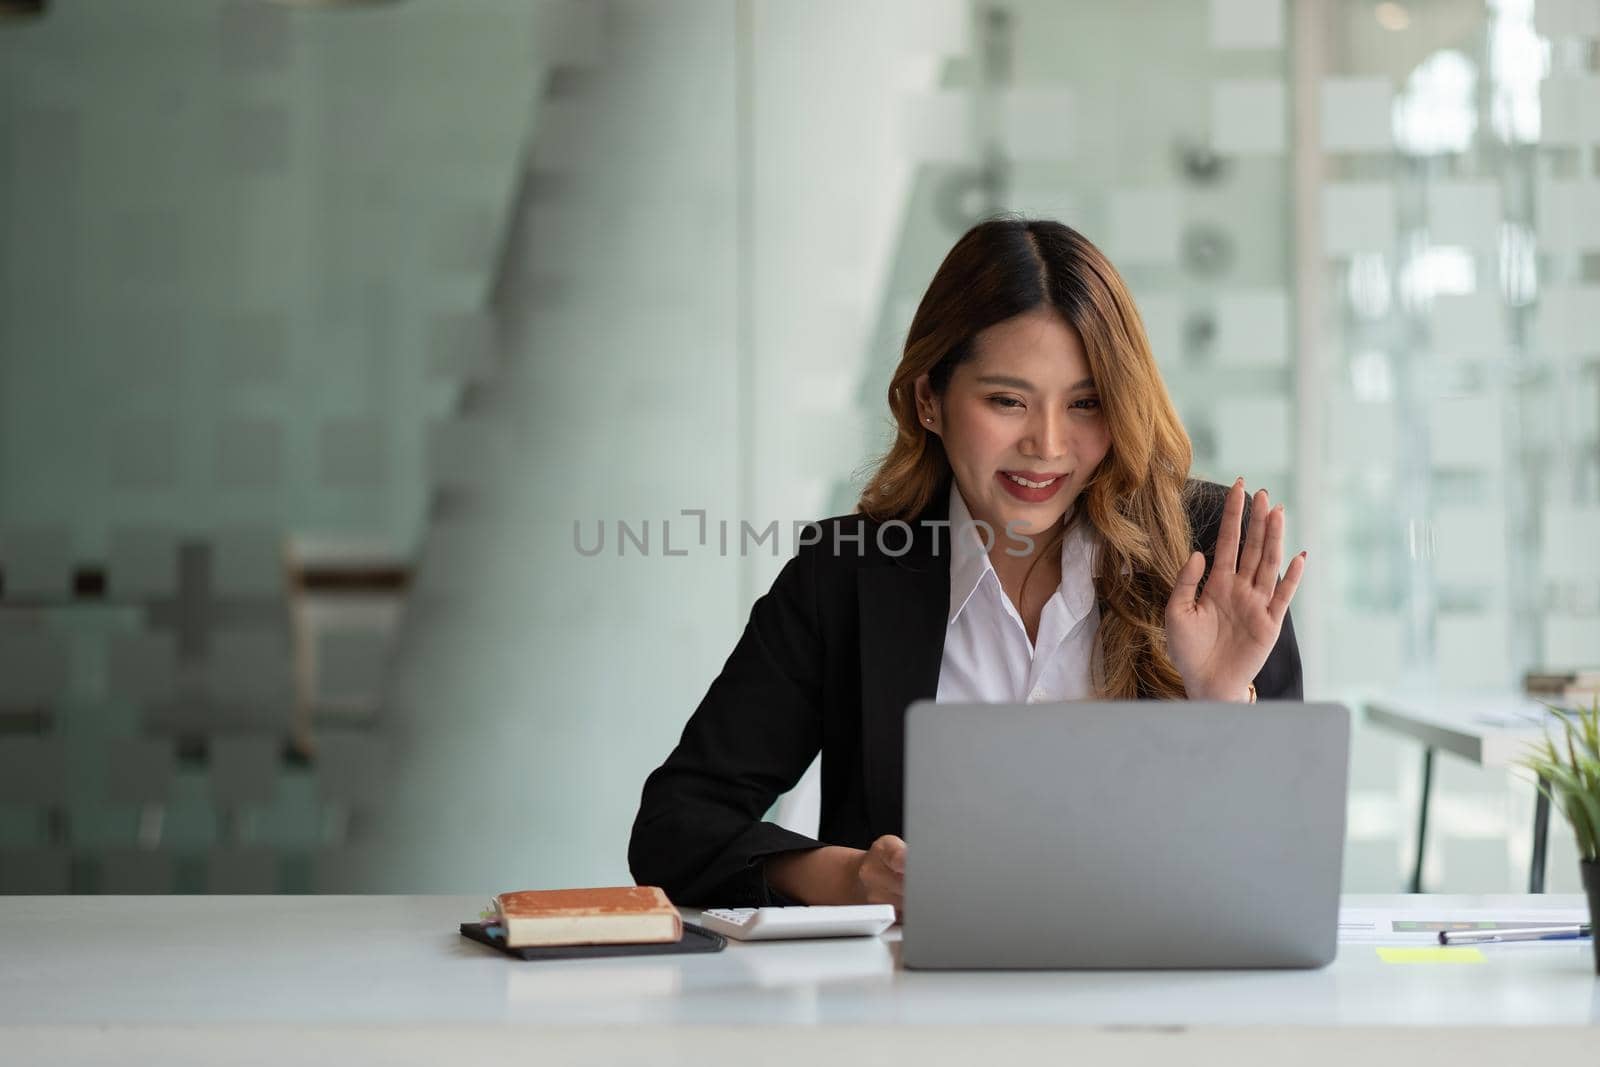 Portrait of smiling asian woman waving hello talking on video call. Successful young woman sitting white suits. Business conference via laptop by nateemee